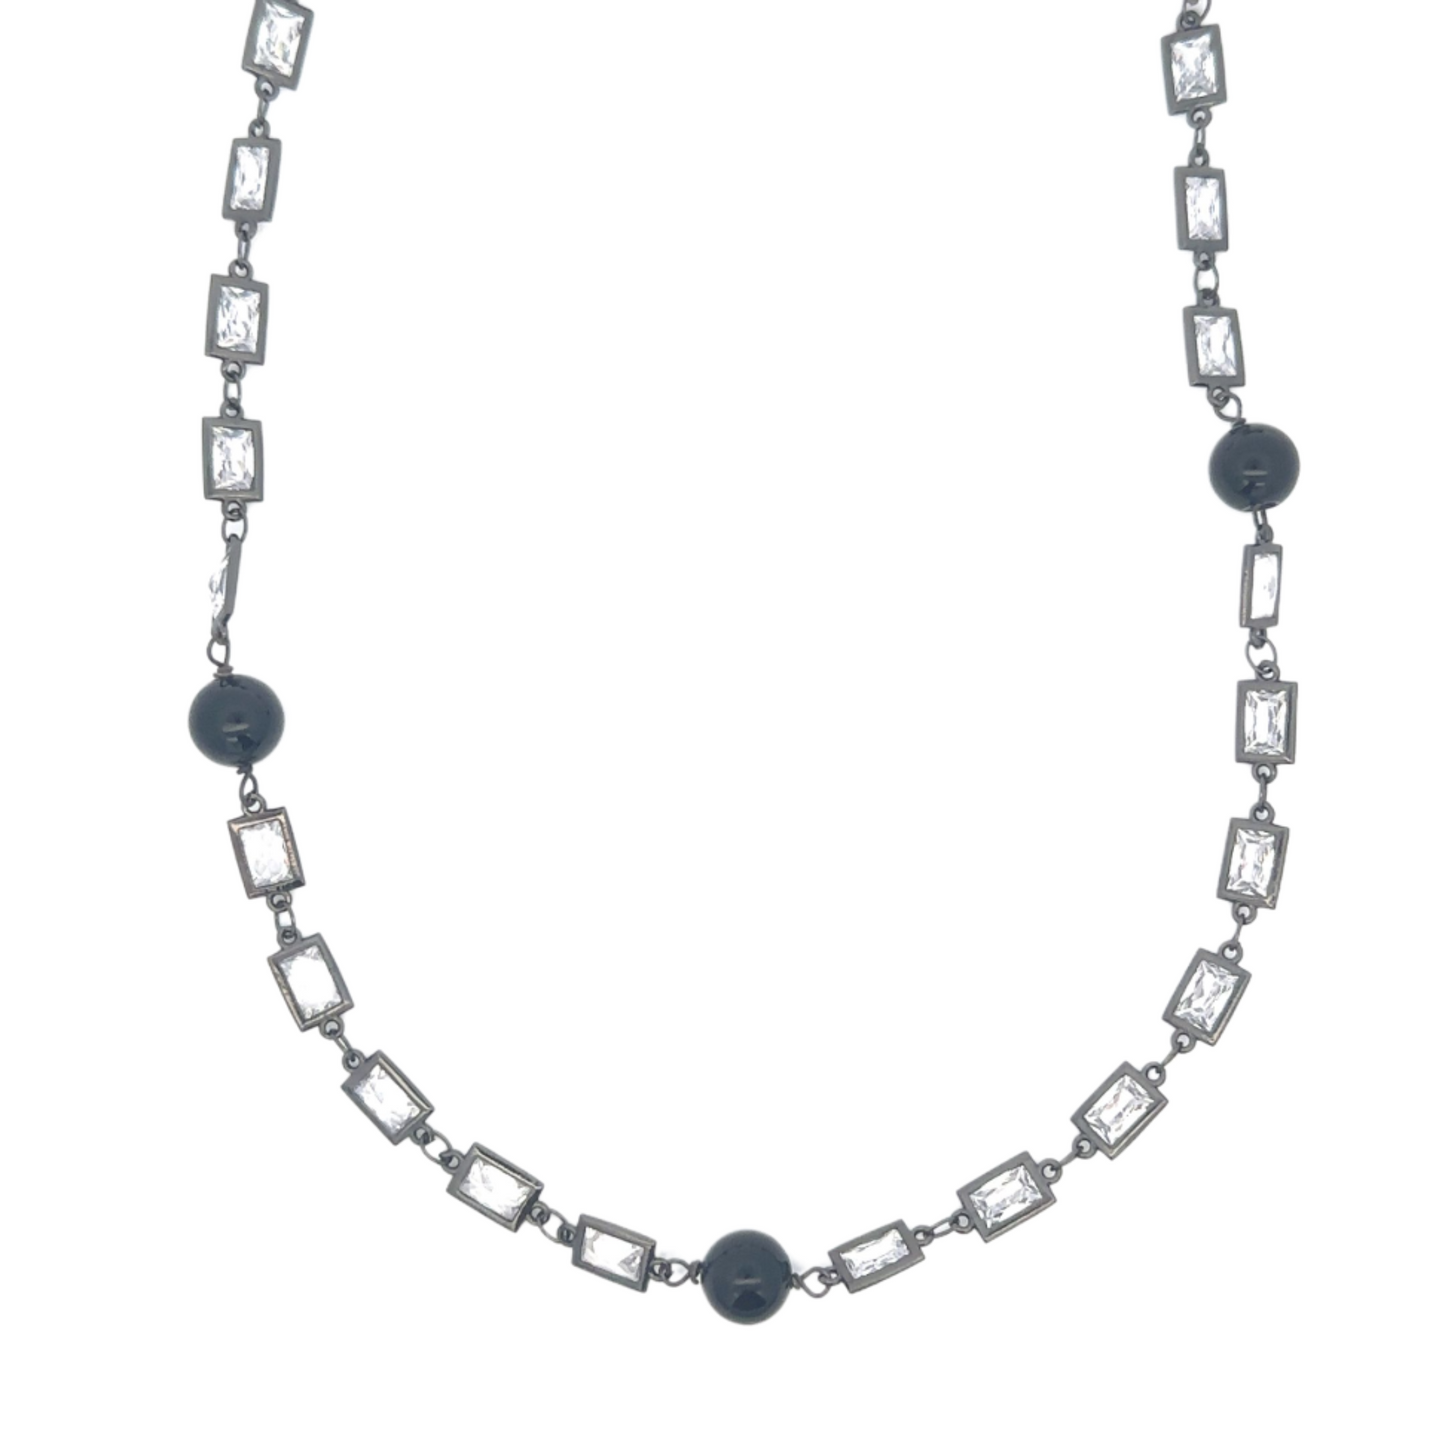 Oxidized Sterling Square Crystal and Black Bead Necklace